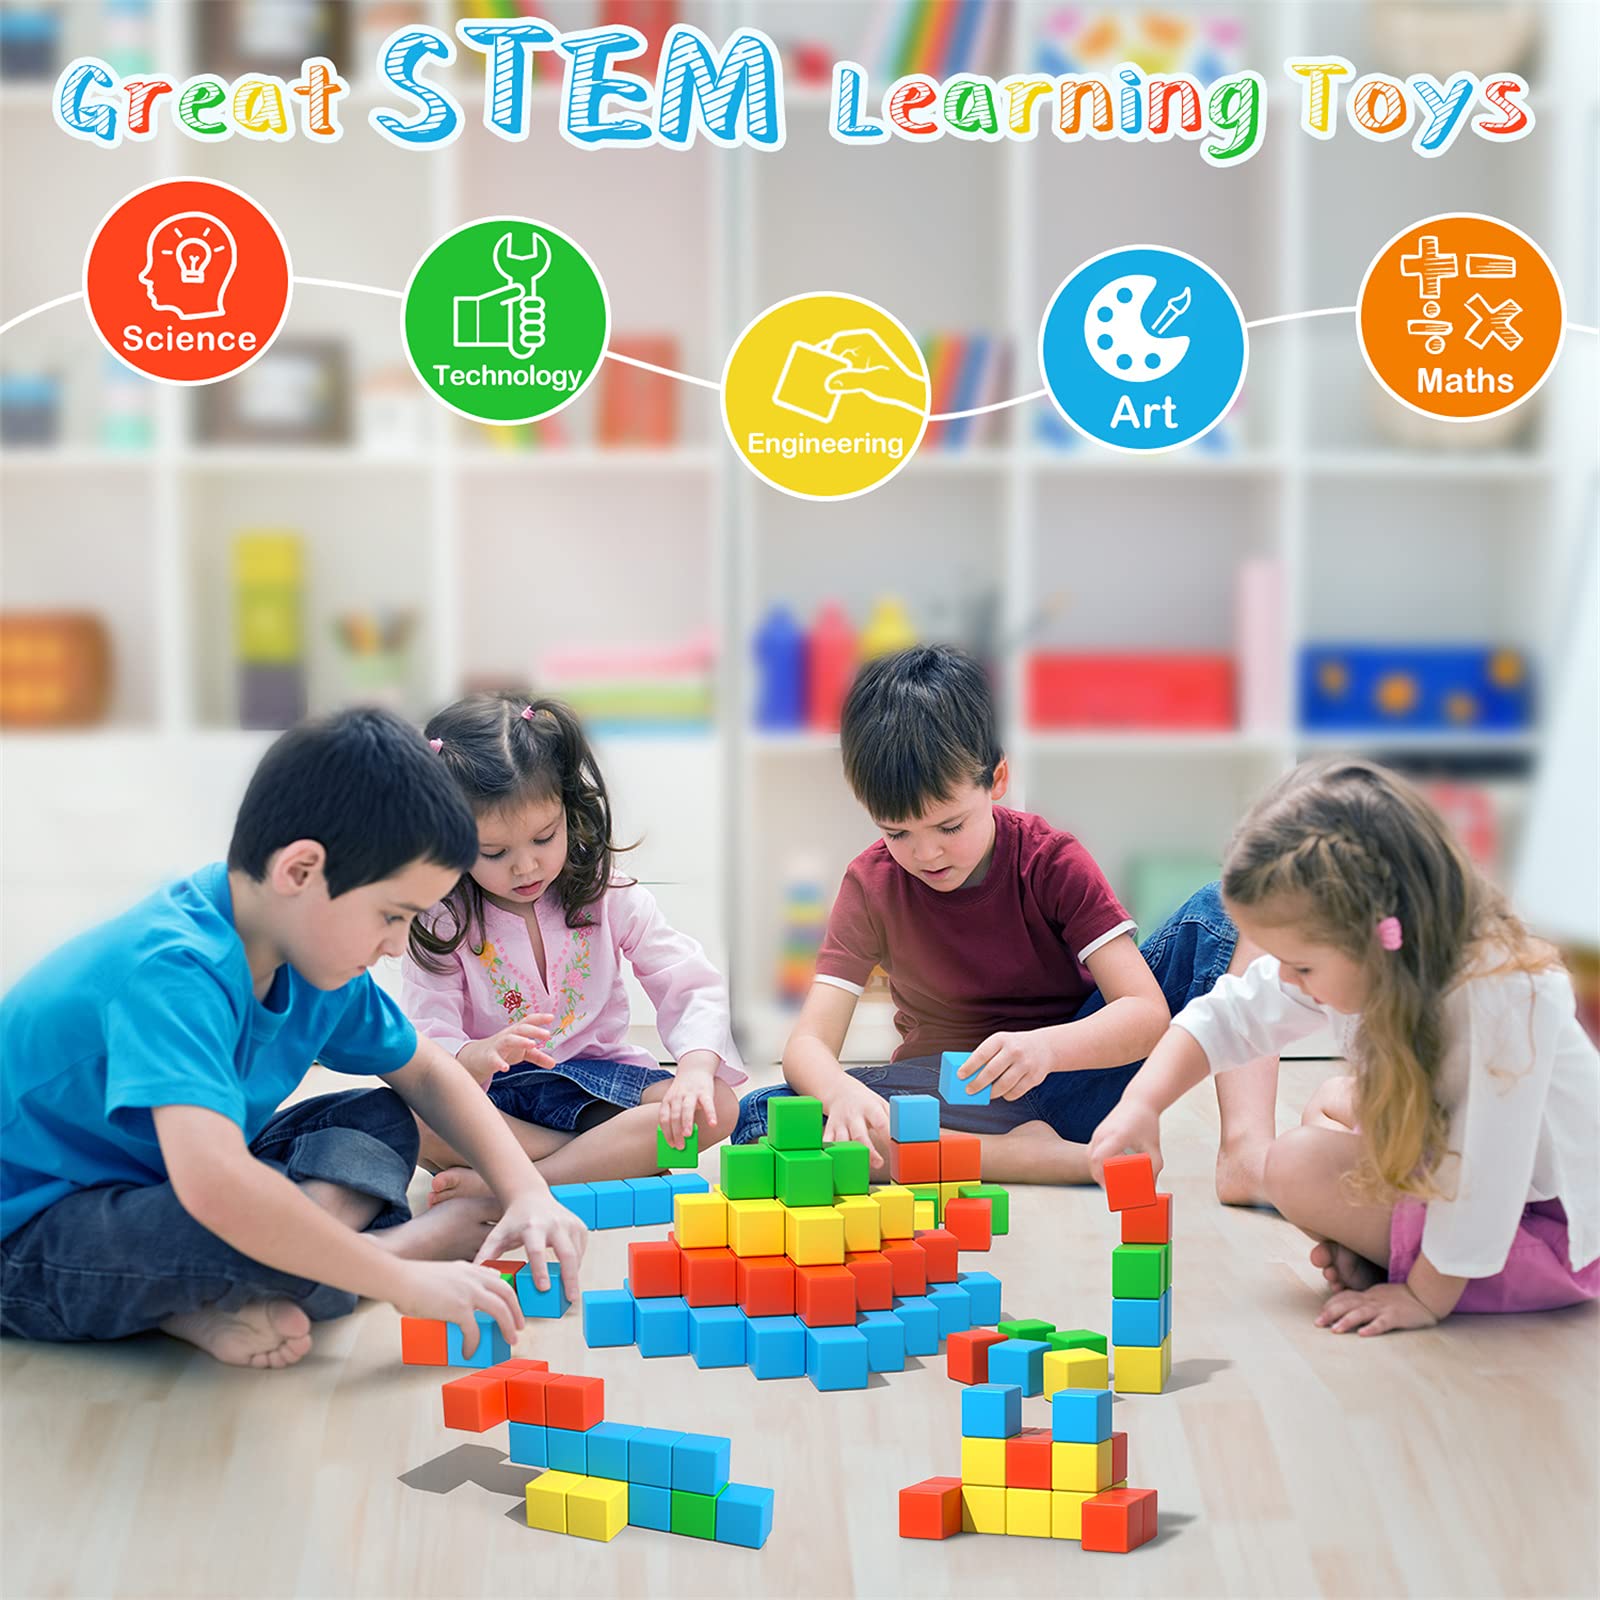 Magnetic Blocks, 28 Pieces 1.34 inch Large Magnetic Building Blocks, 3D Magnetic Cubes for Kids, Preschool Educational Construction Kit, Sensory Montessori Toys Kids Blocks for Boys Girls Toddlers